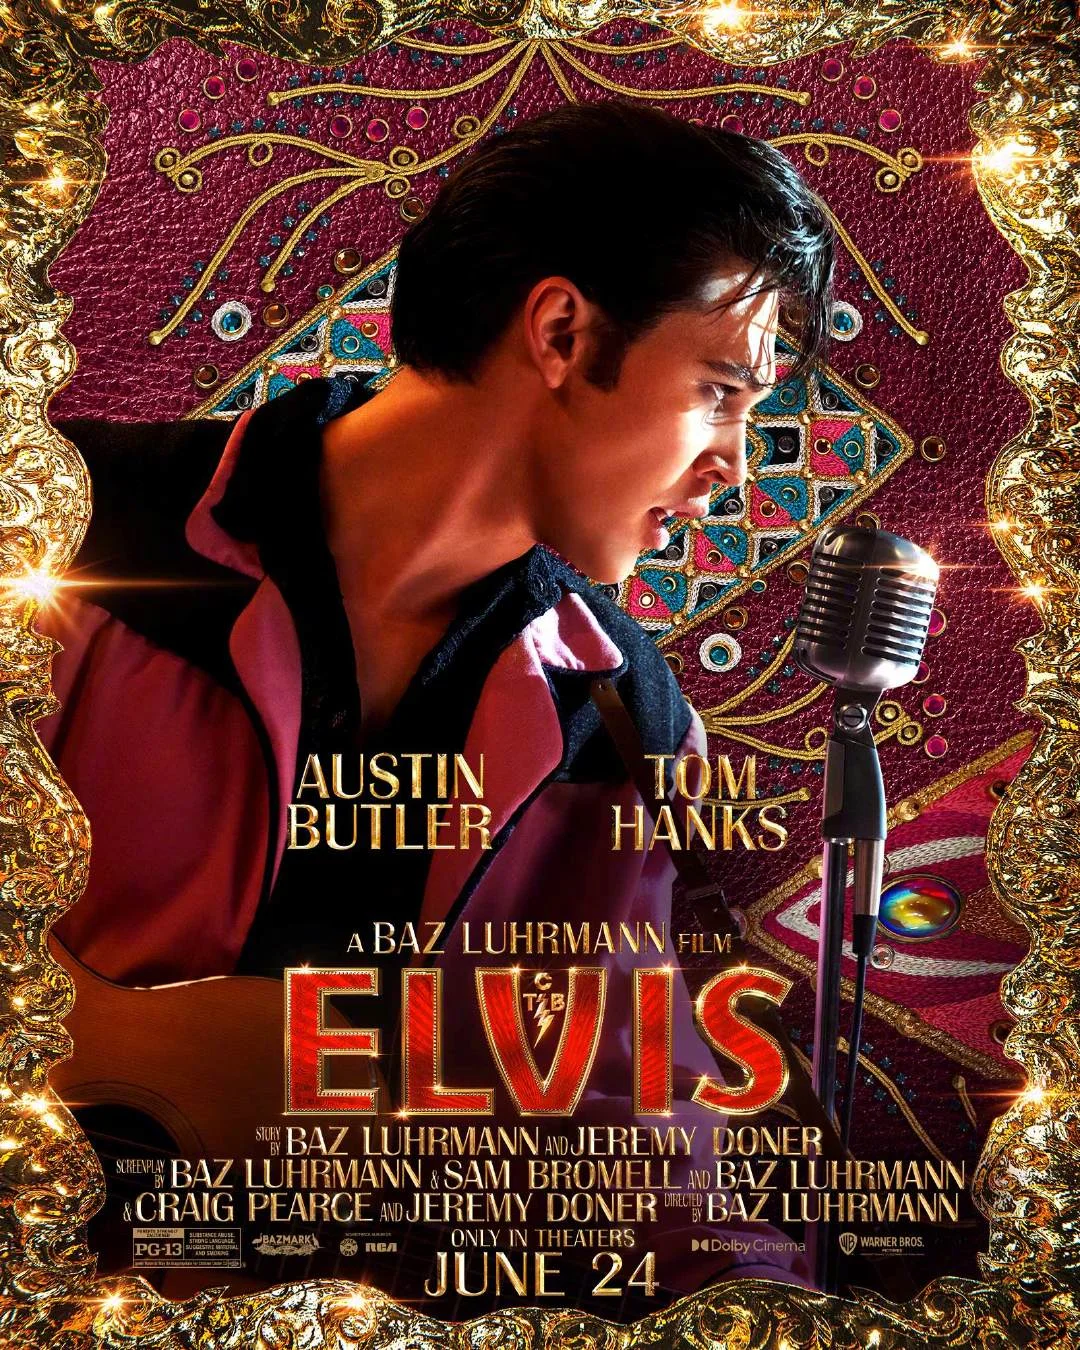 Baz Luhrmann-directed biopic "Elvis" releases three posters